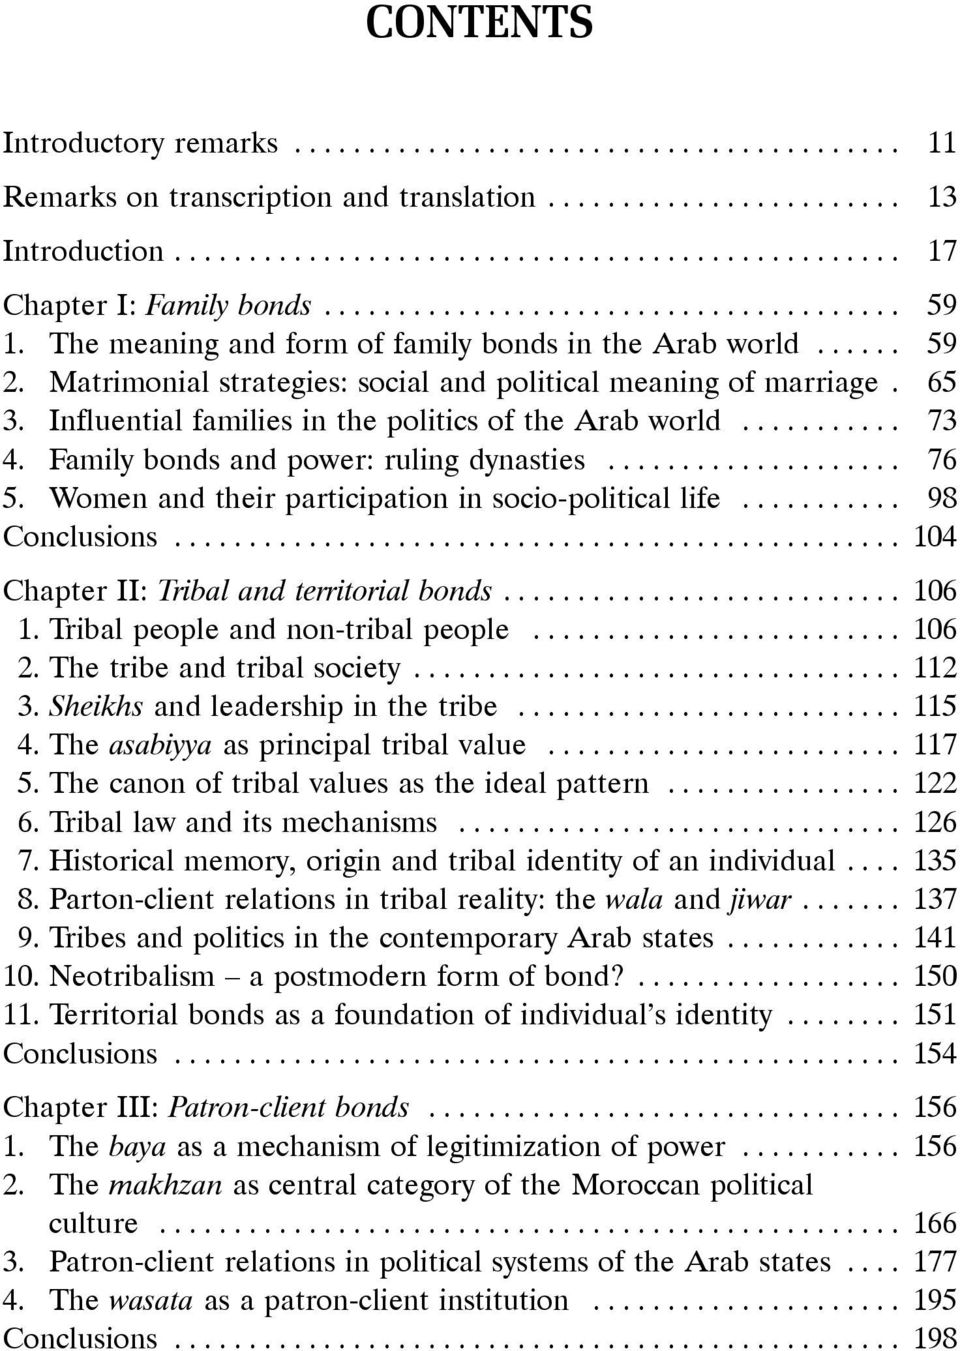 Influential families in the politics of the Arab world........... 73 4. Family bonds and power: ruling dynasties.................... 76 5. Women and their participation in socio-political life.